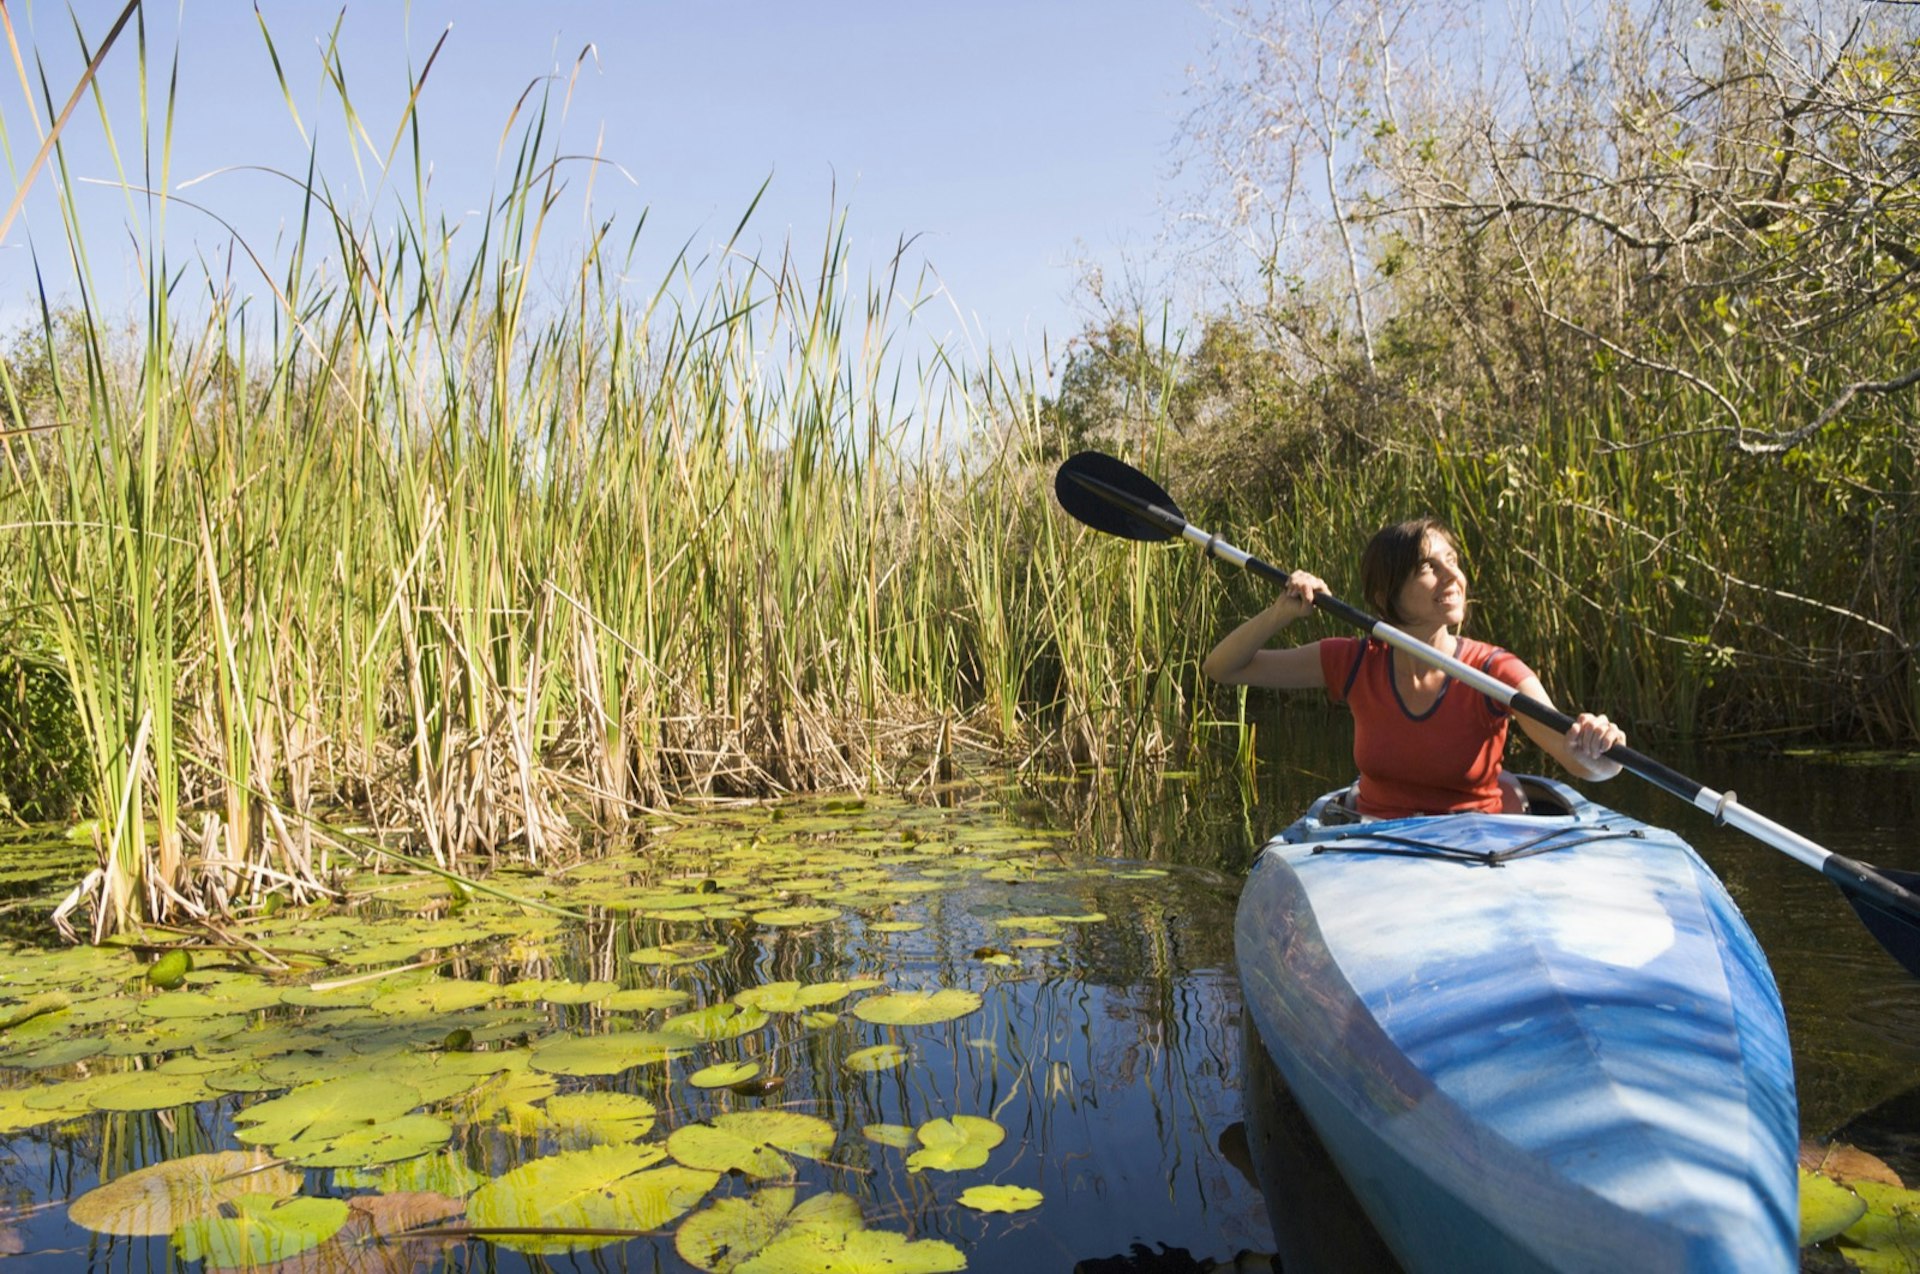 Hispanic woman paddling kayak in everglades with lily pads and reeds on both sides